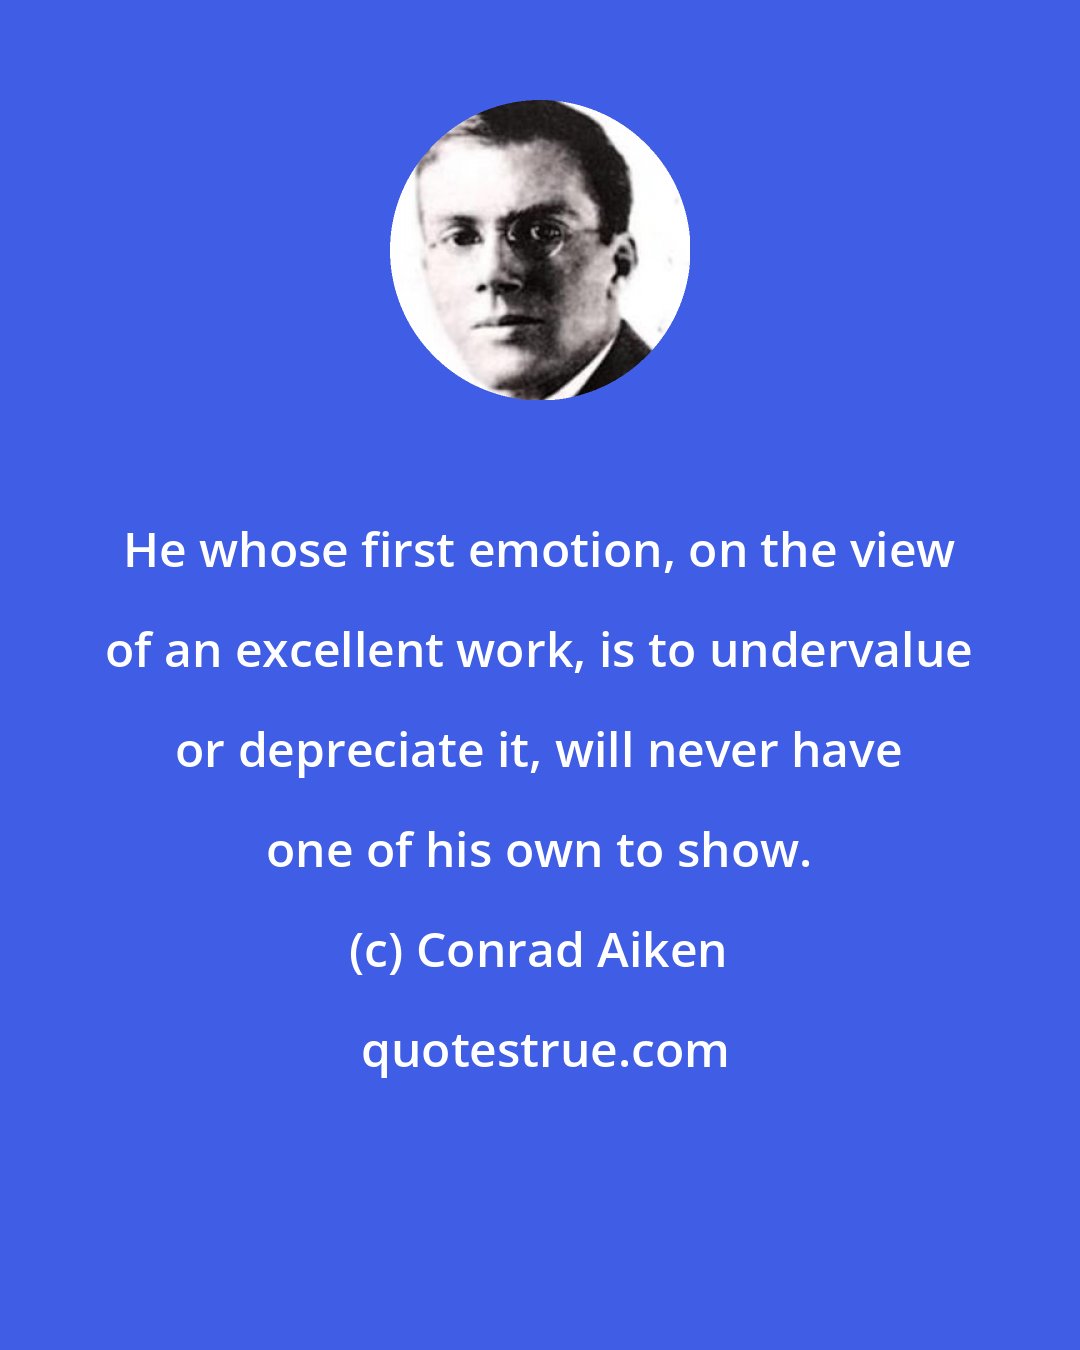 Conrad Aiken: He whose first emotion, on the view of an excellent work, is to undervalue or depreciate it, will never have one of his own to show.